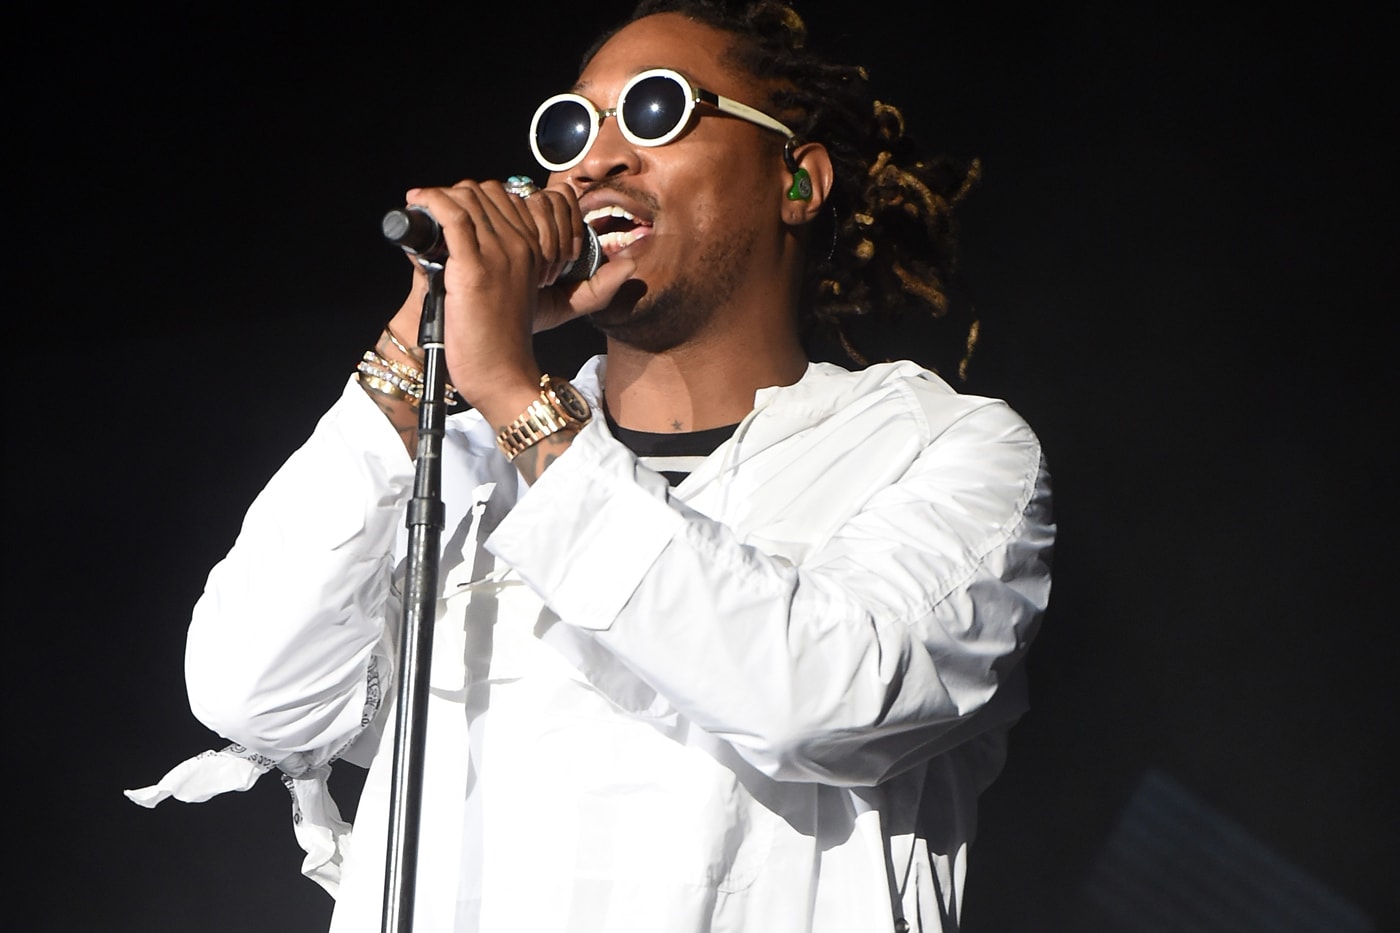 Future and Polo G First Week Album Projections Billboard 200 high off life the goat album chart hits daily double 